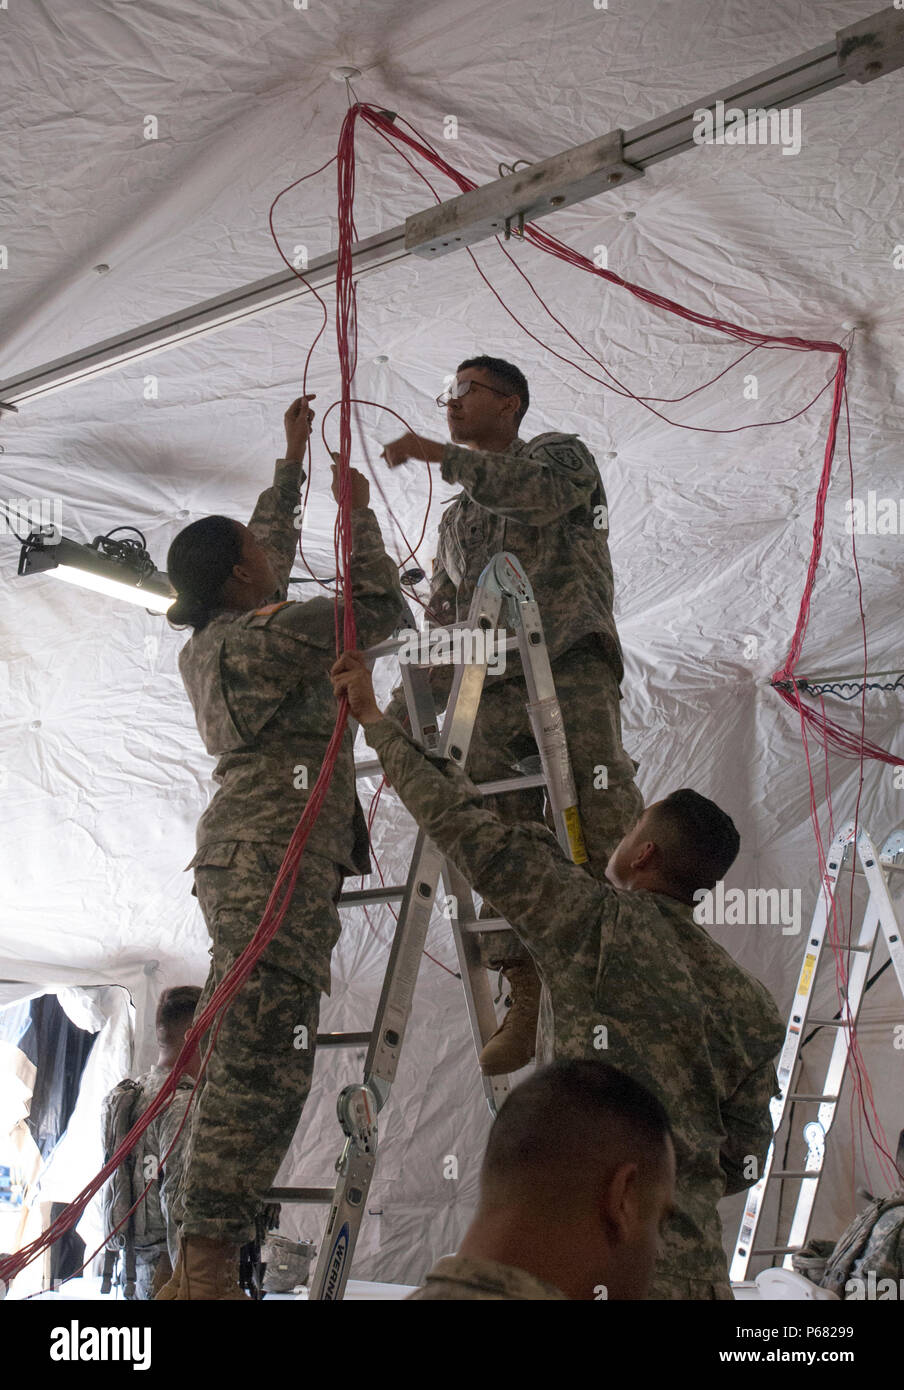 Soldiers from the California Army National Guard’s Headquarters Company, 224th Sustainment Brigade establish network connectivity within the unit’s state of the art Standard Integrated Command Post System during their 2016 annual training event at Camp Roberts, May 16. Housed within a 6,000 square-foot Deployable Rapid Assembly Shelter, the multi-tent complex will provide a fully operational control center capable of tracking each of the brigade’s assets and its movement throughout the state. (U.S. Army Photo by Staff Sgt. Melissa Wood/RELEASED) Stock Photo